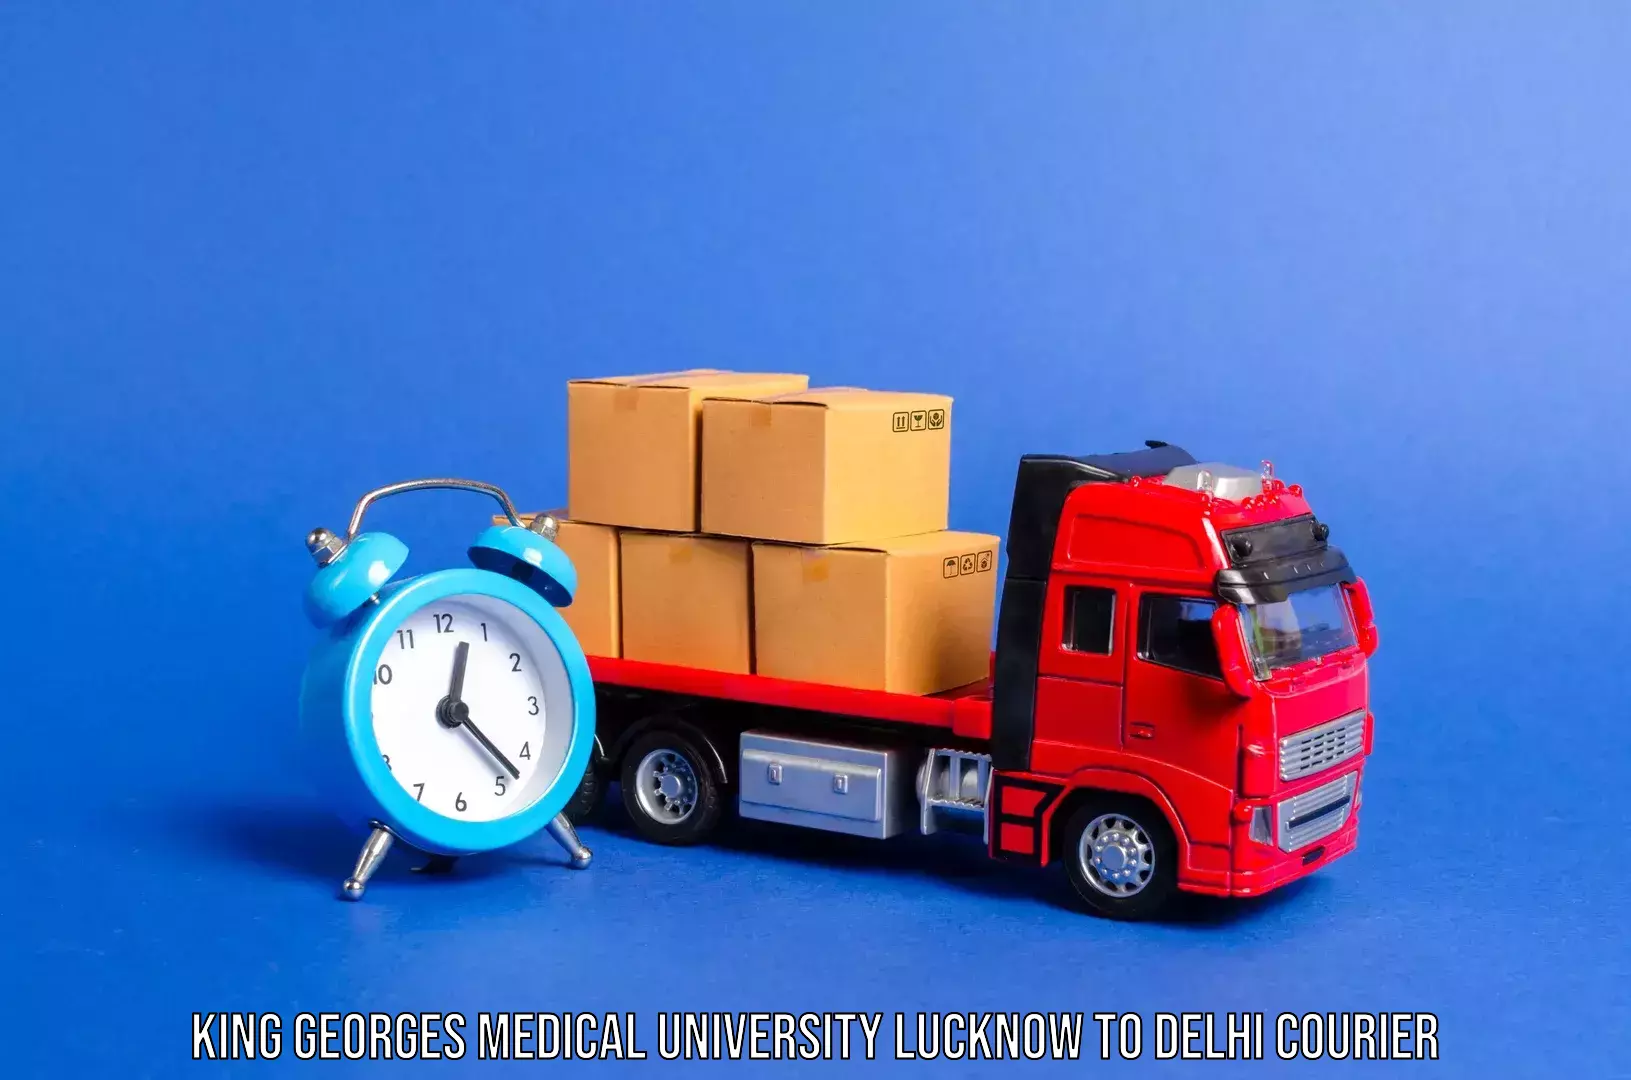 Same day luggage service King Georges Medical University Lucknow to NCR